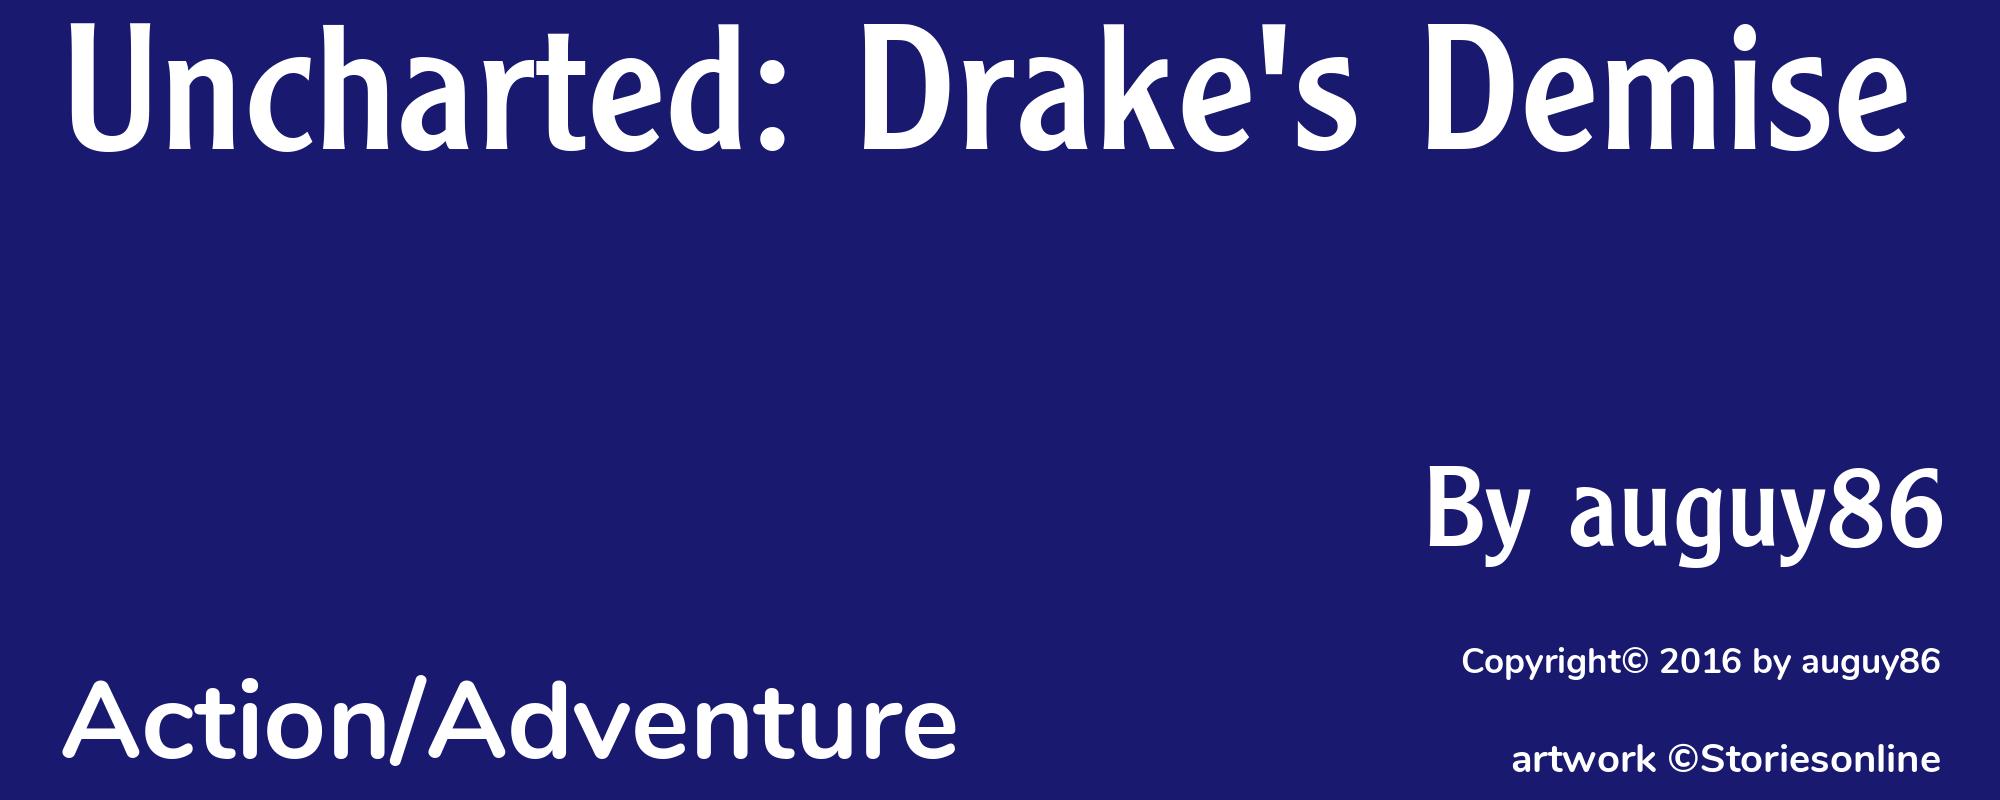 Uncharted: Drake's Demise - Cover